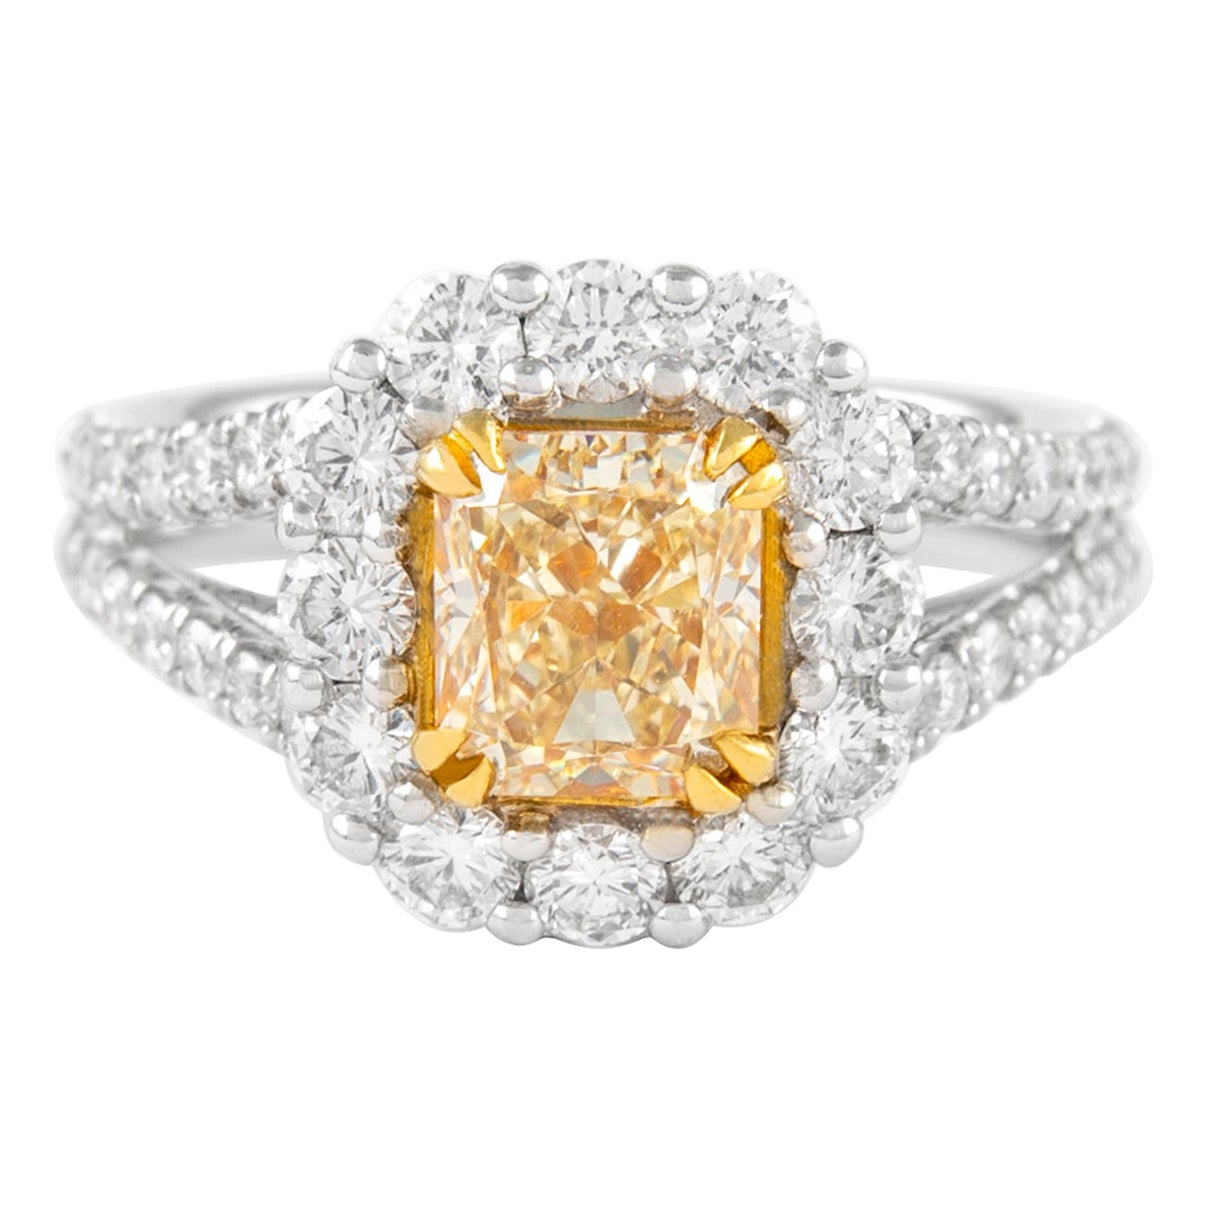 Alexander 1.52ct Fancy Intense Yellow VS2 Radiant Diamond with Halo Ring 18k For Sale